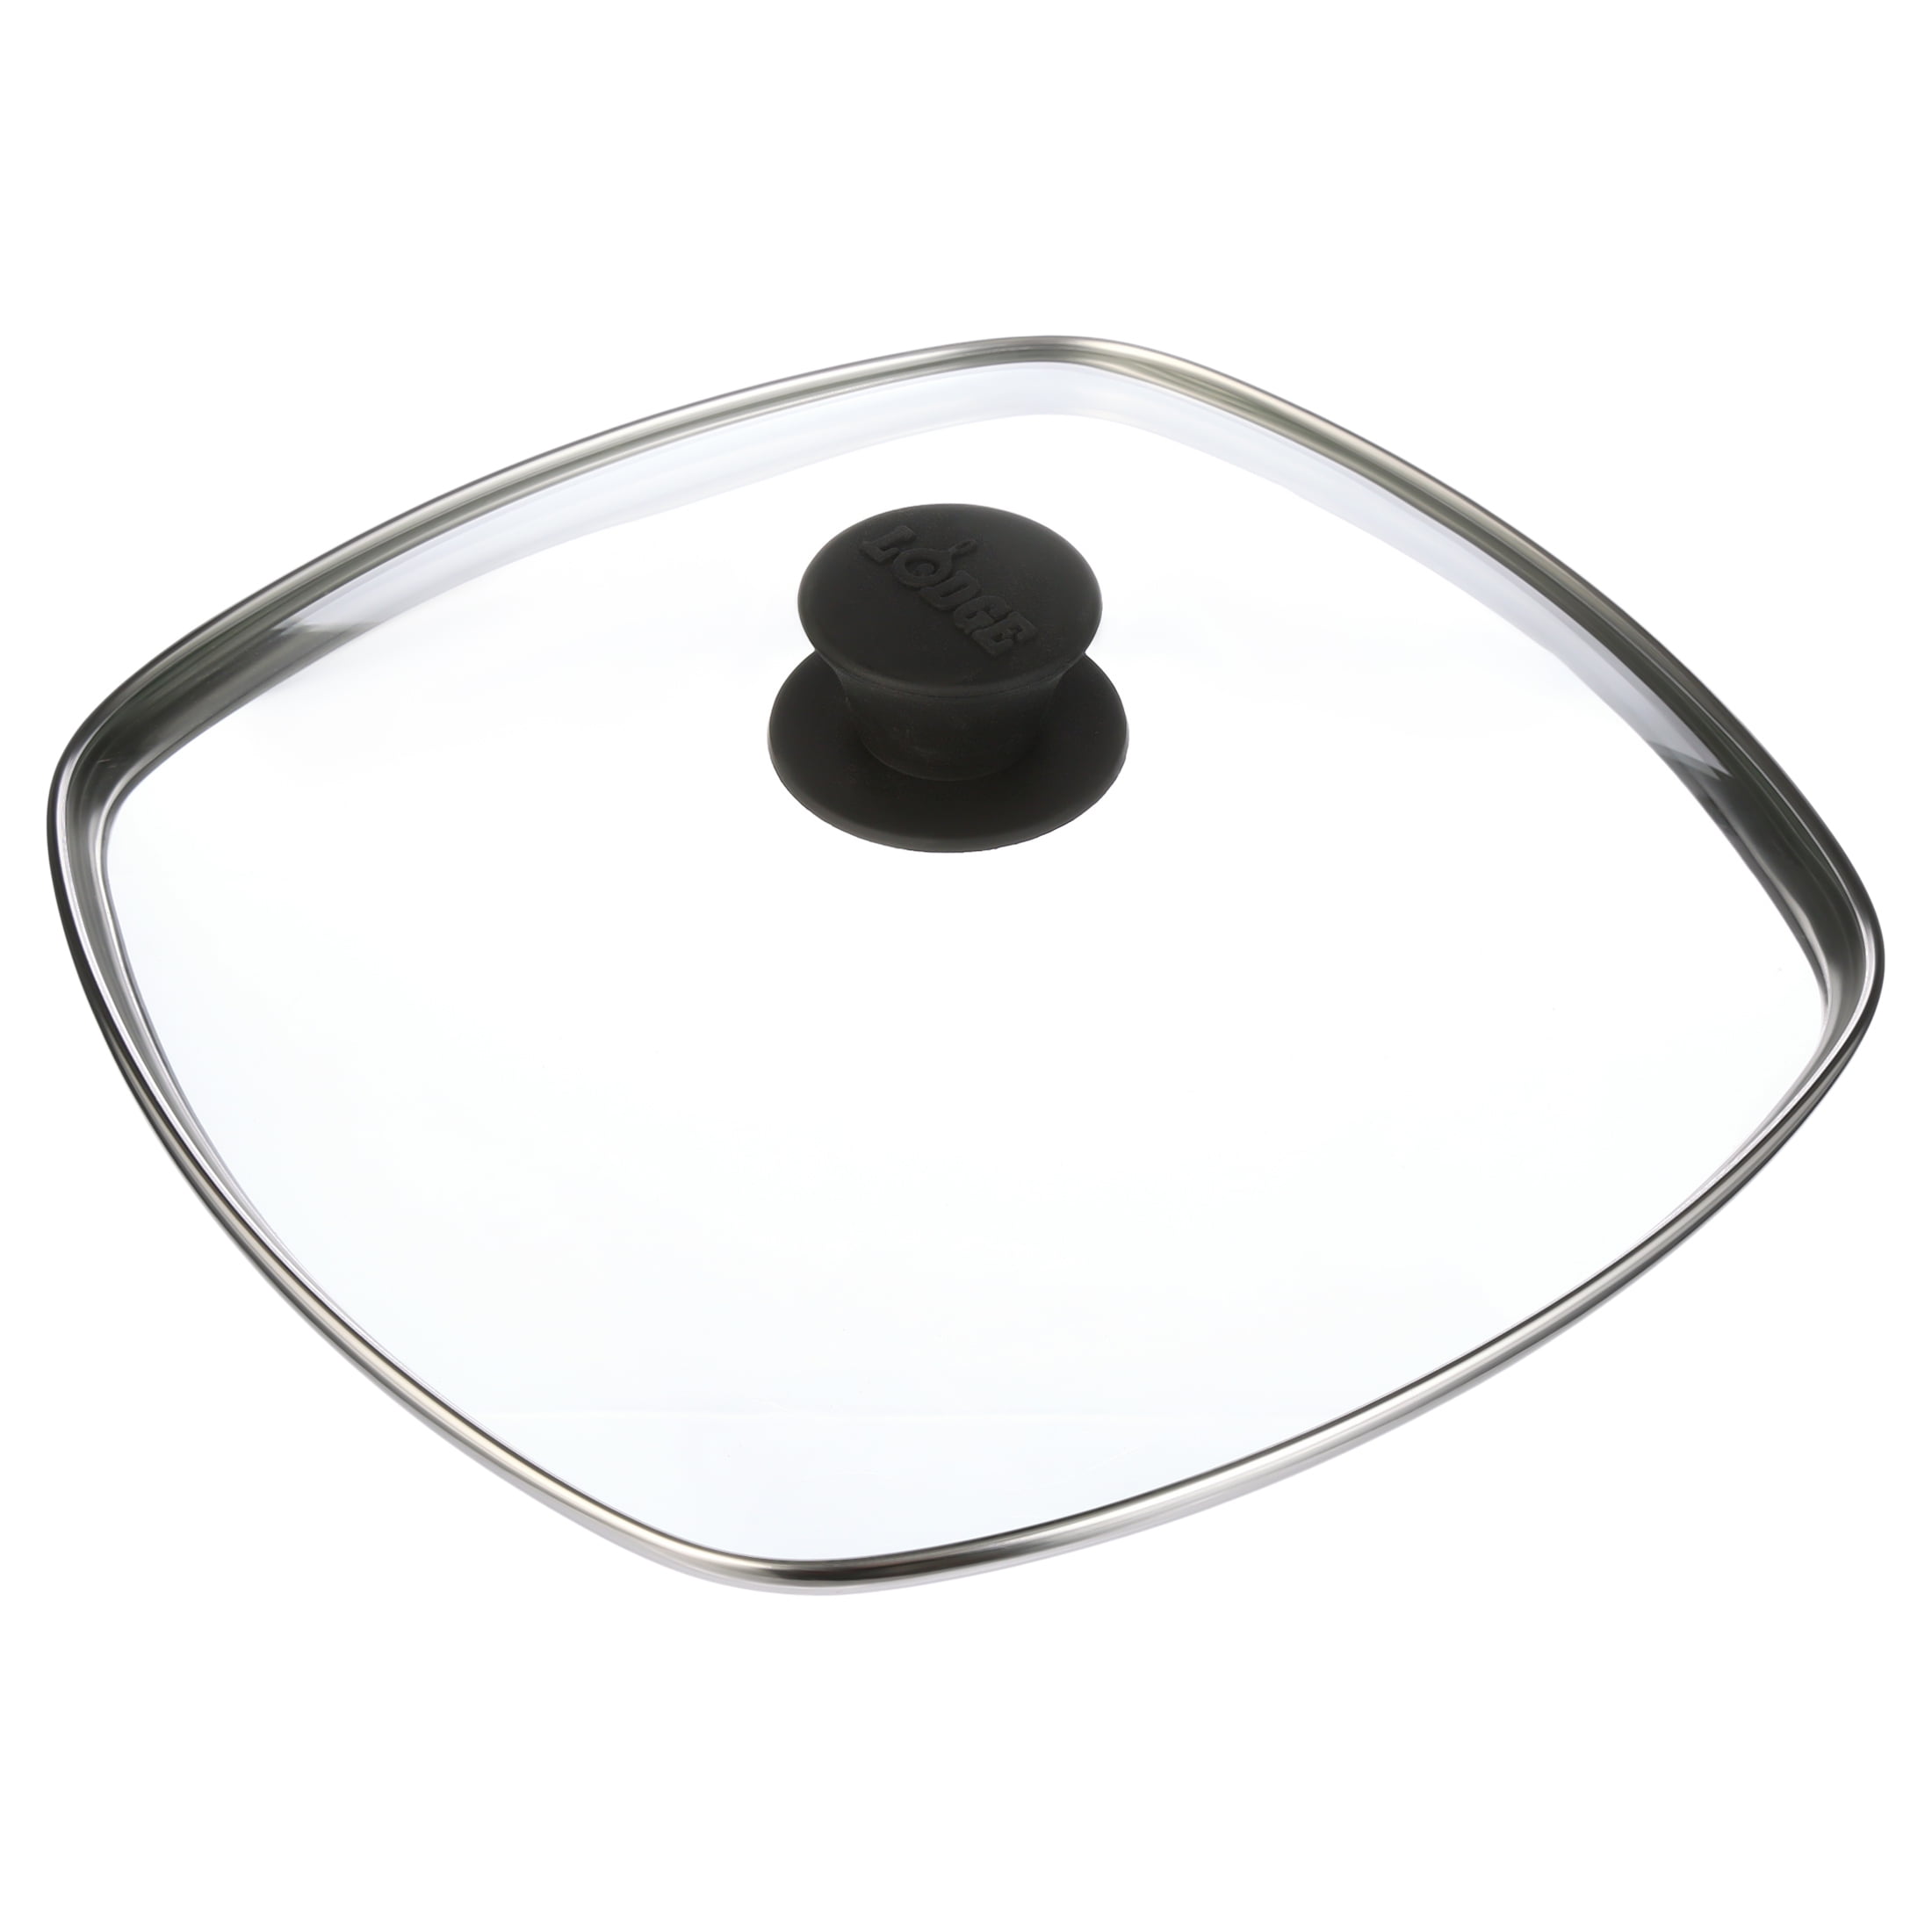 Lodge Tempered Glass Lid for Cast Iron Pans Is on Sale at